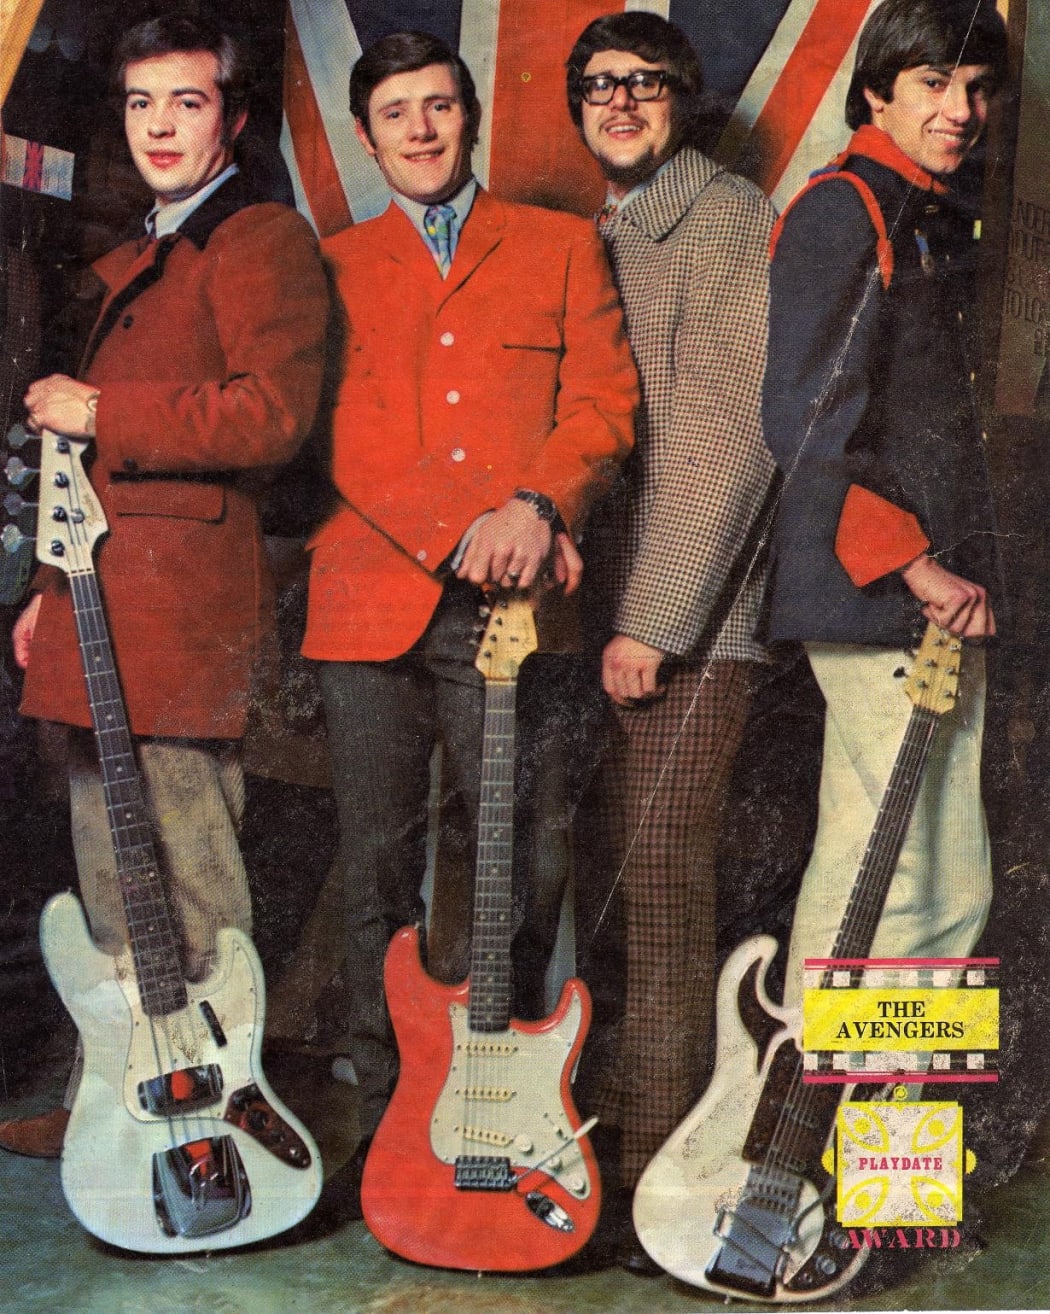 The Avengers pose for a publicity shot in 1967. From left to right Eddie McDonald (bass), Dave Brown (guitar), Hank 'Ian' Davis (drums) and guitarist / keyboard player Clive Cockburn.